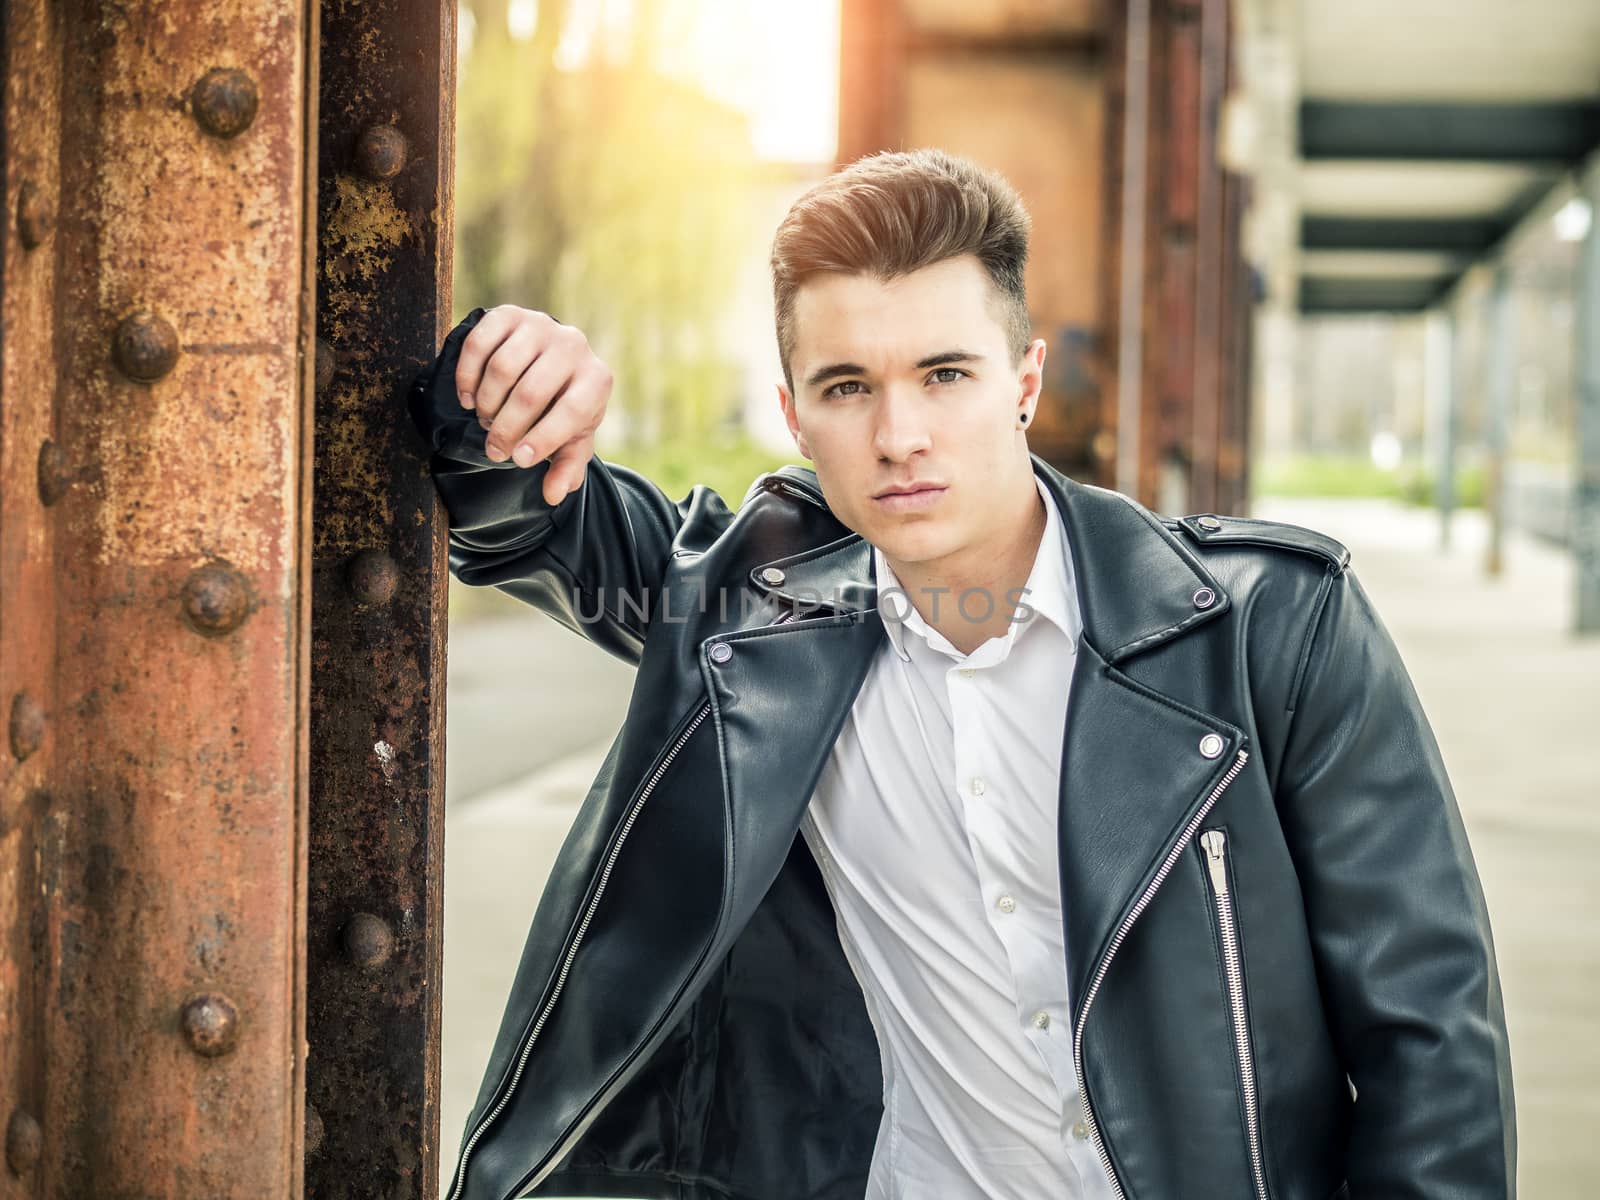 One handsome young man in urban setting by artofphoto